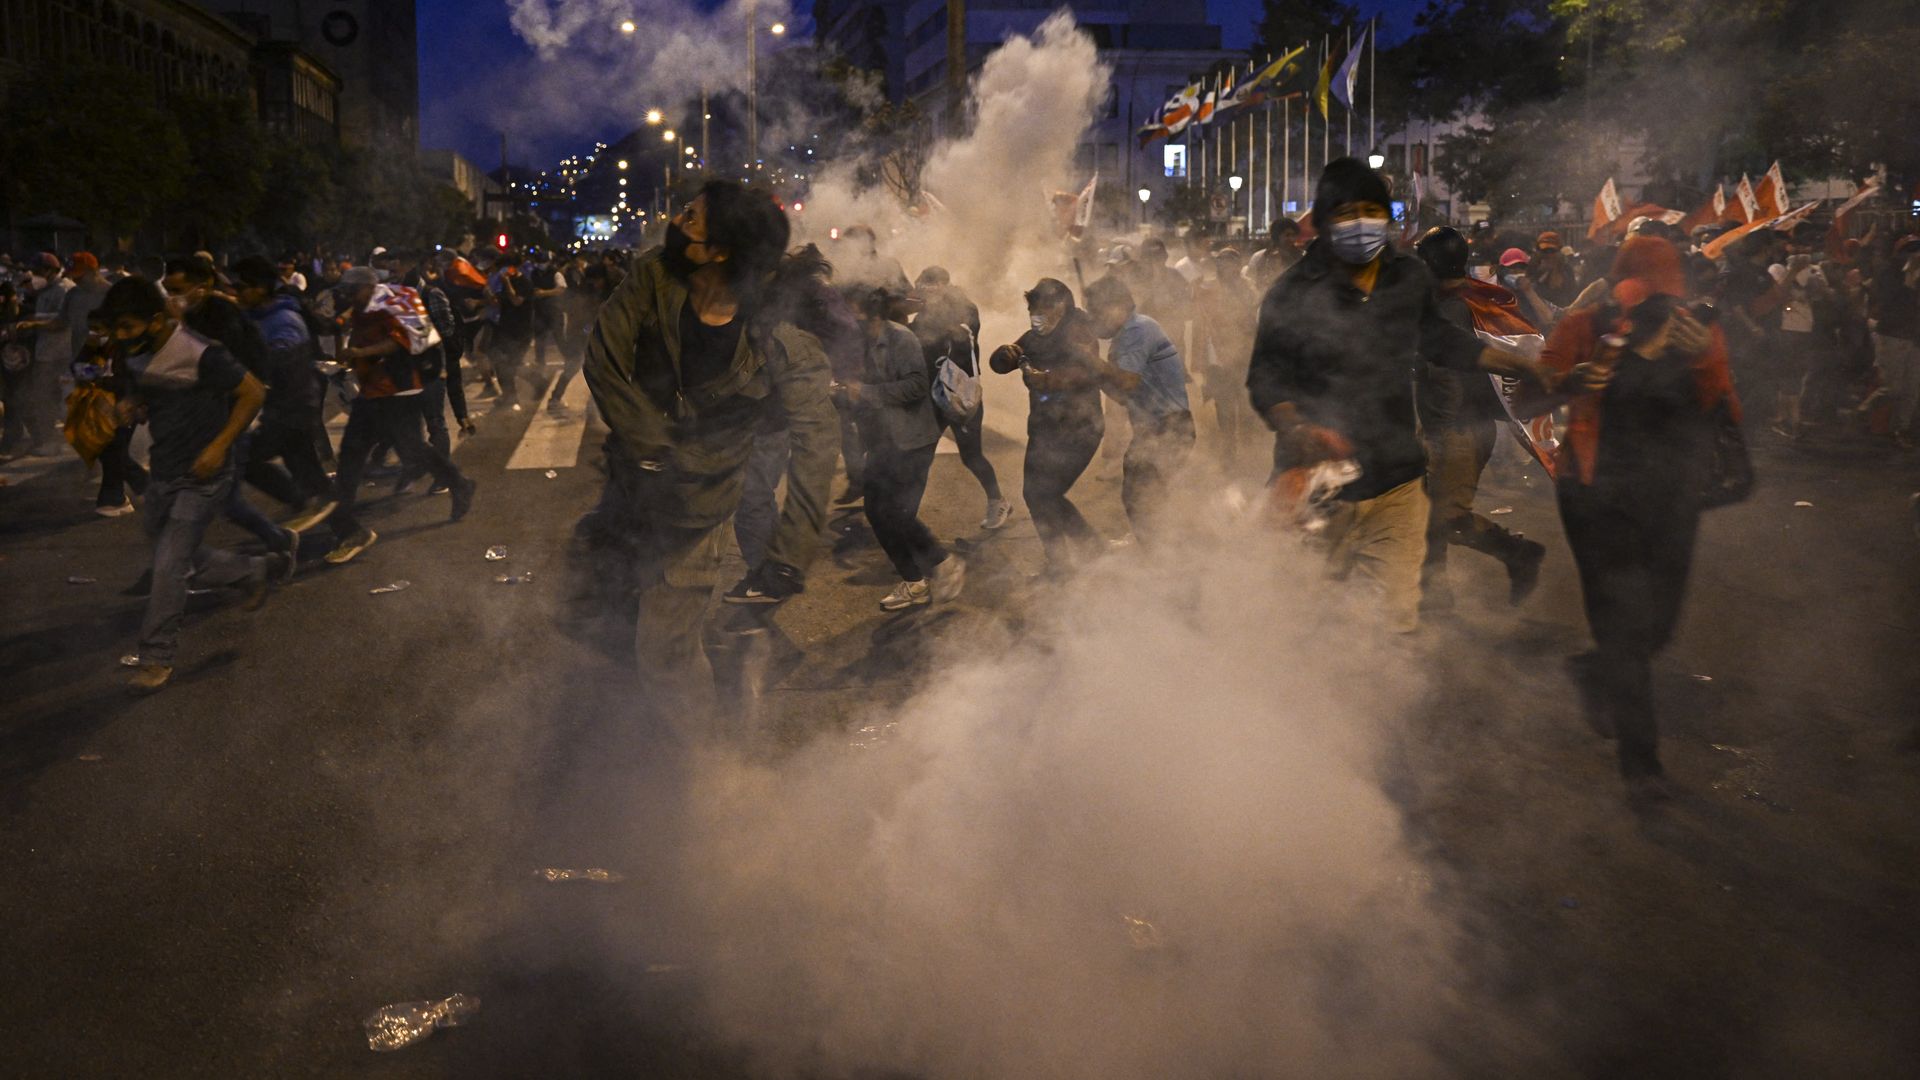 Supporters of ex-President Pedro Castillo take cover from police tear gas during clashes in Lima, on December 11.